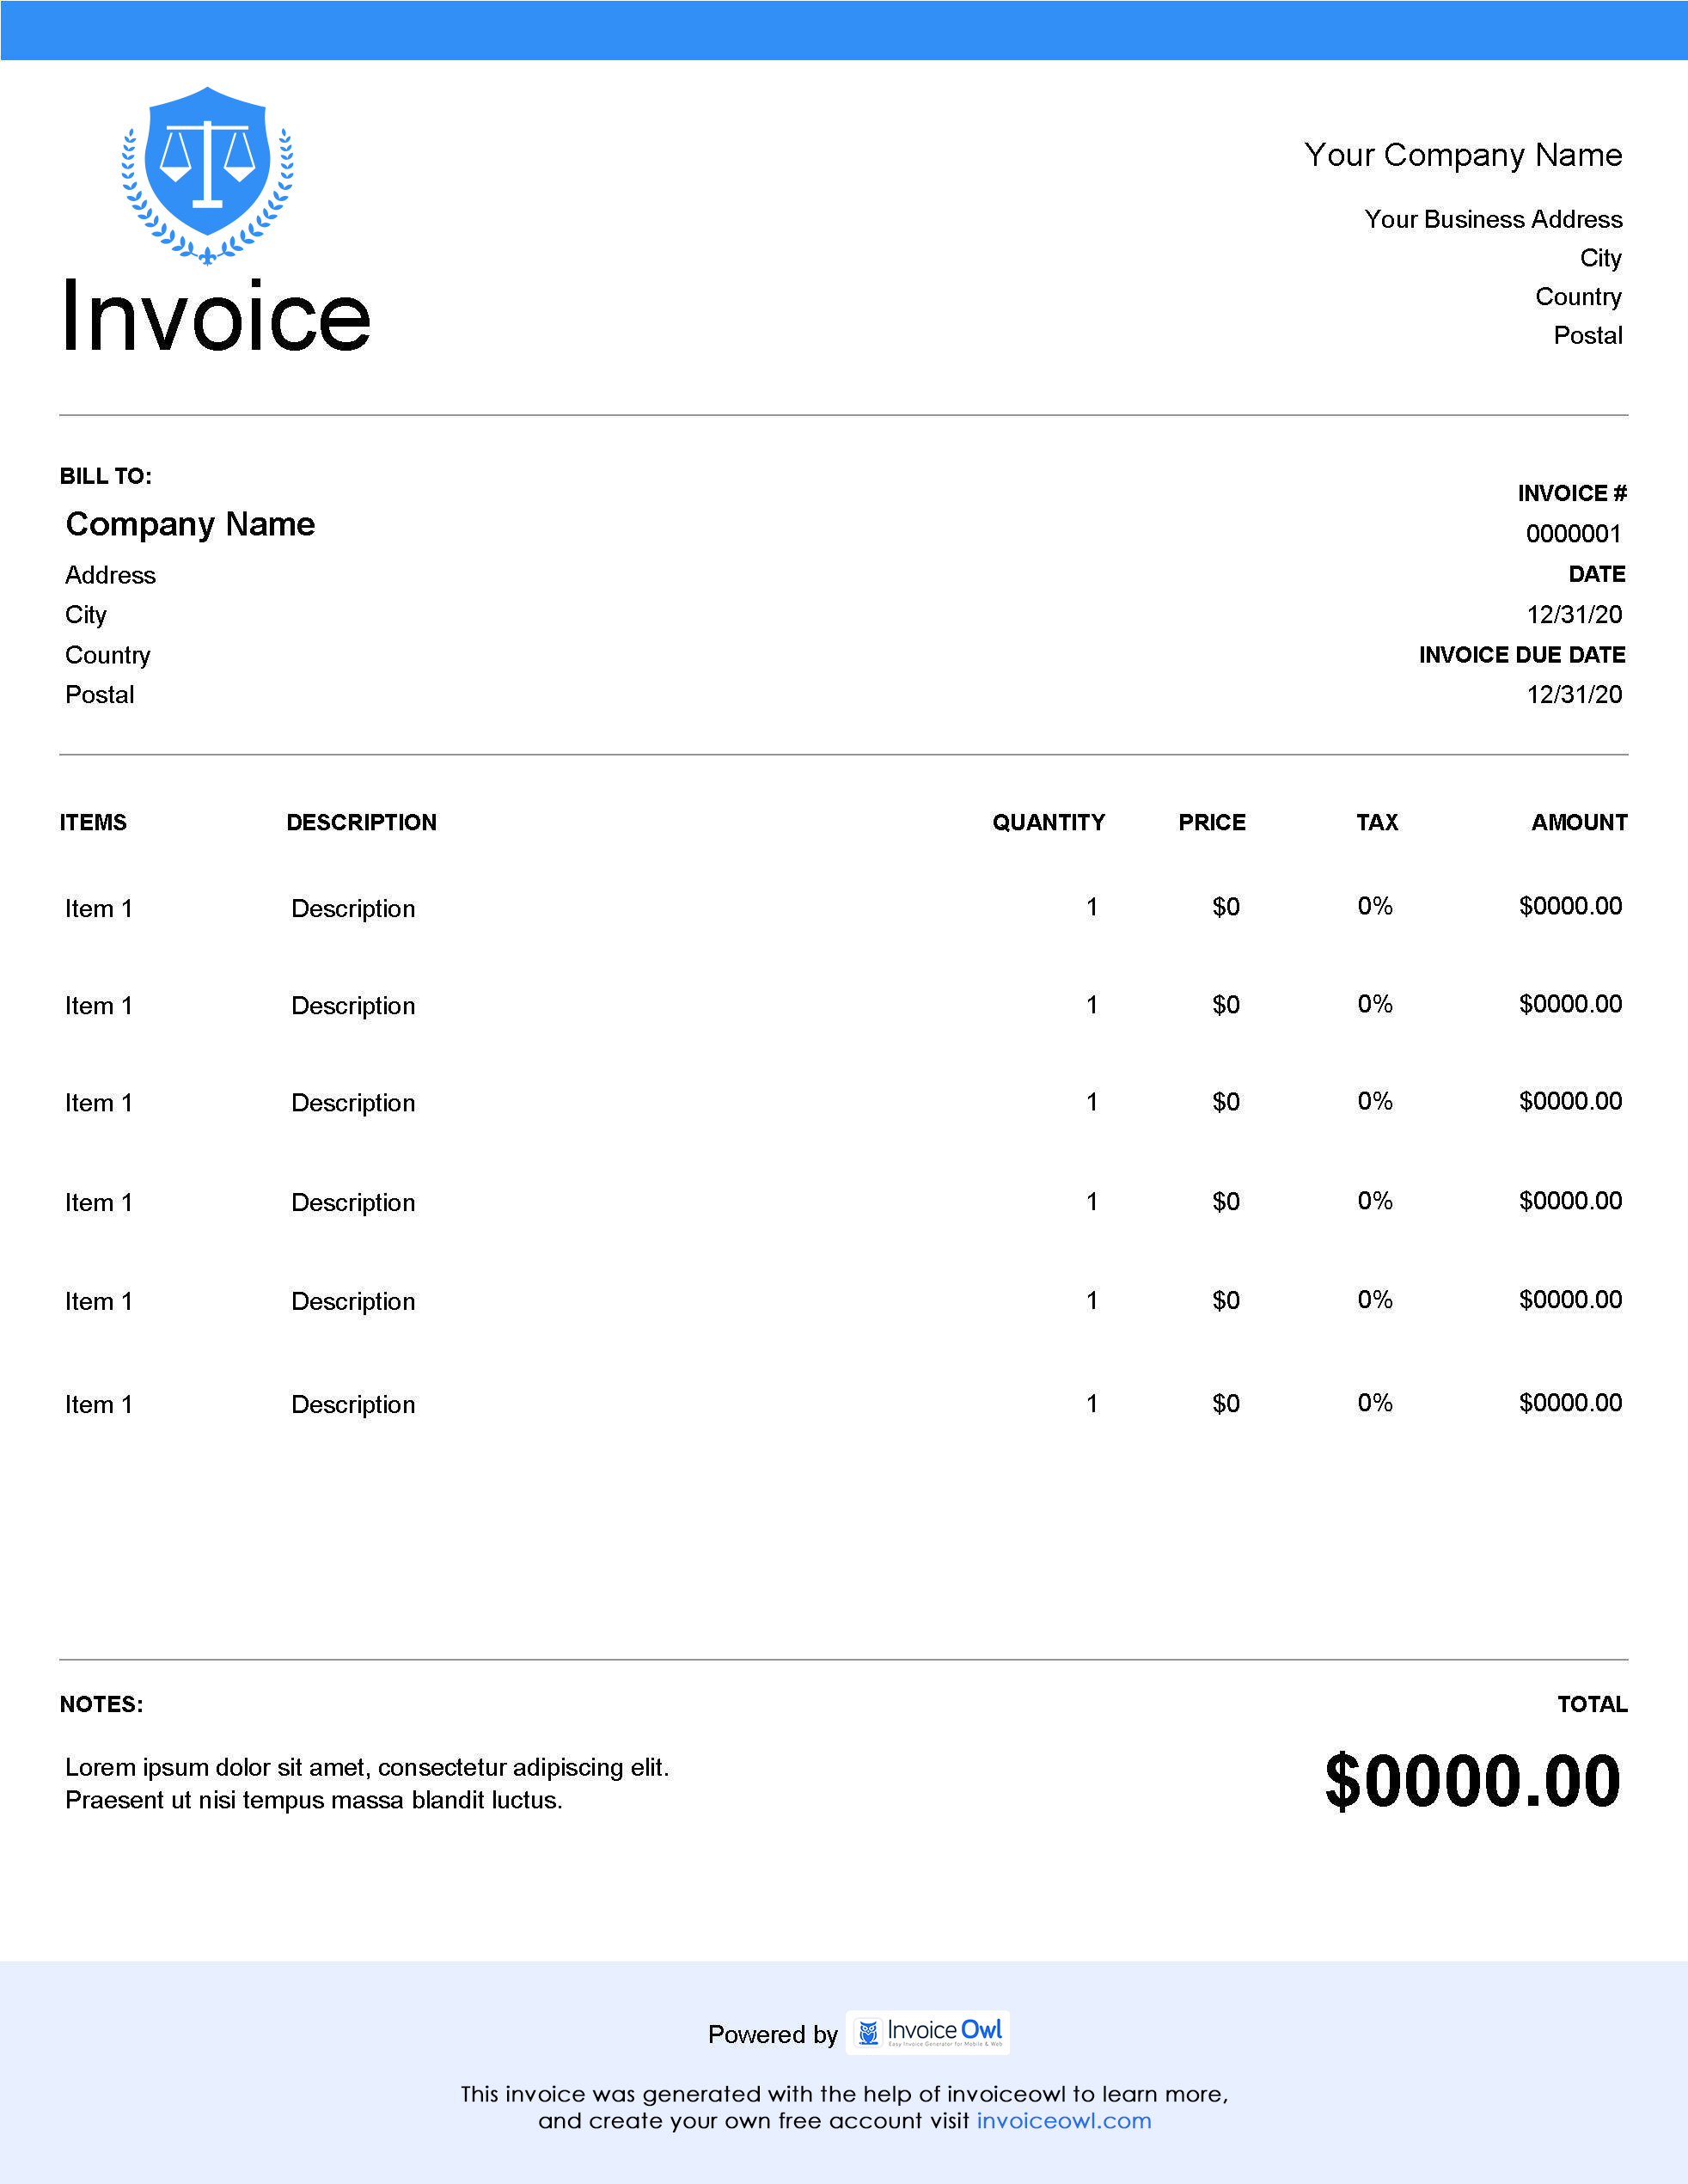 Download professional legal services invoice template